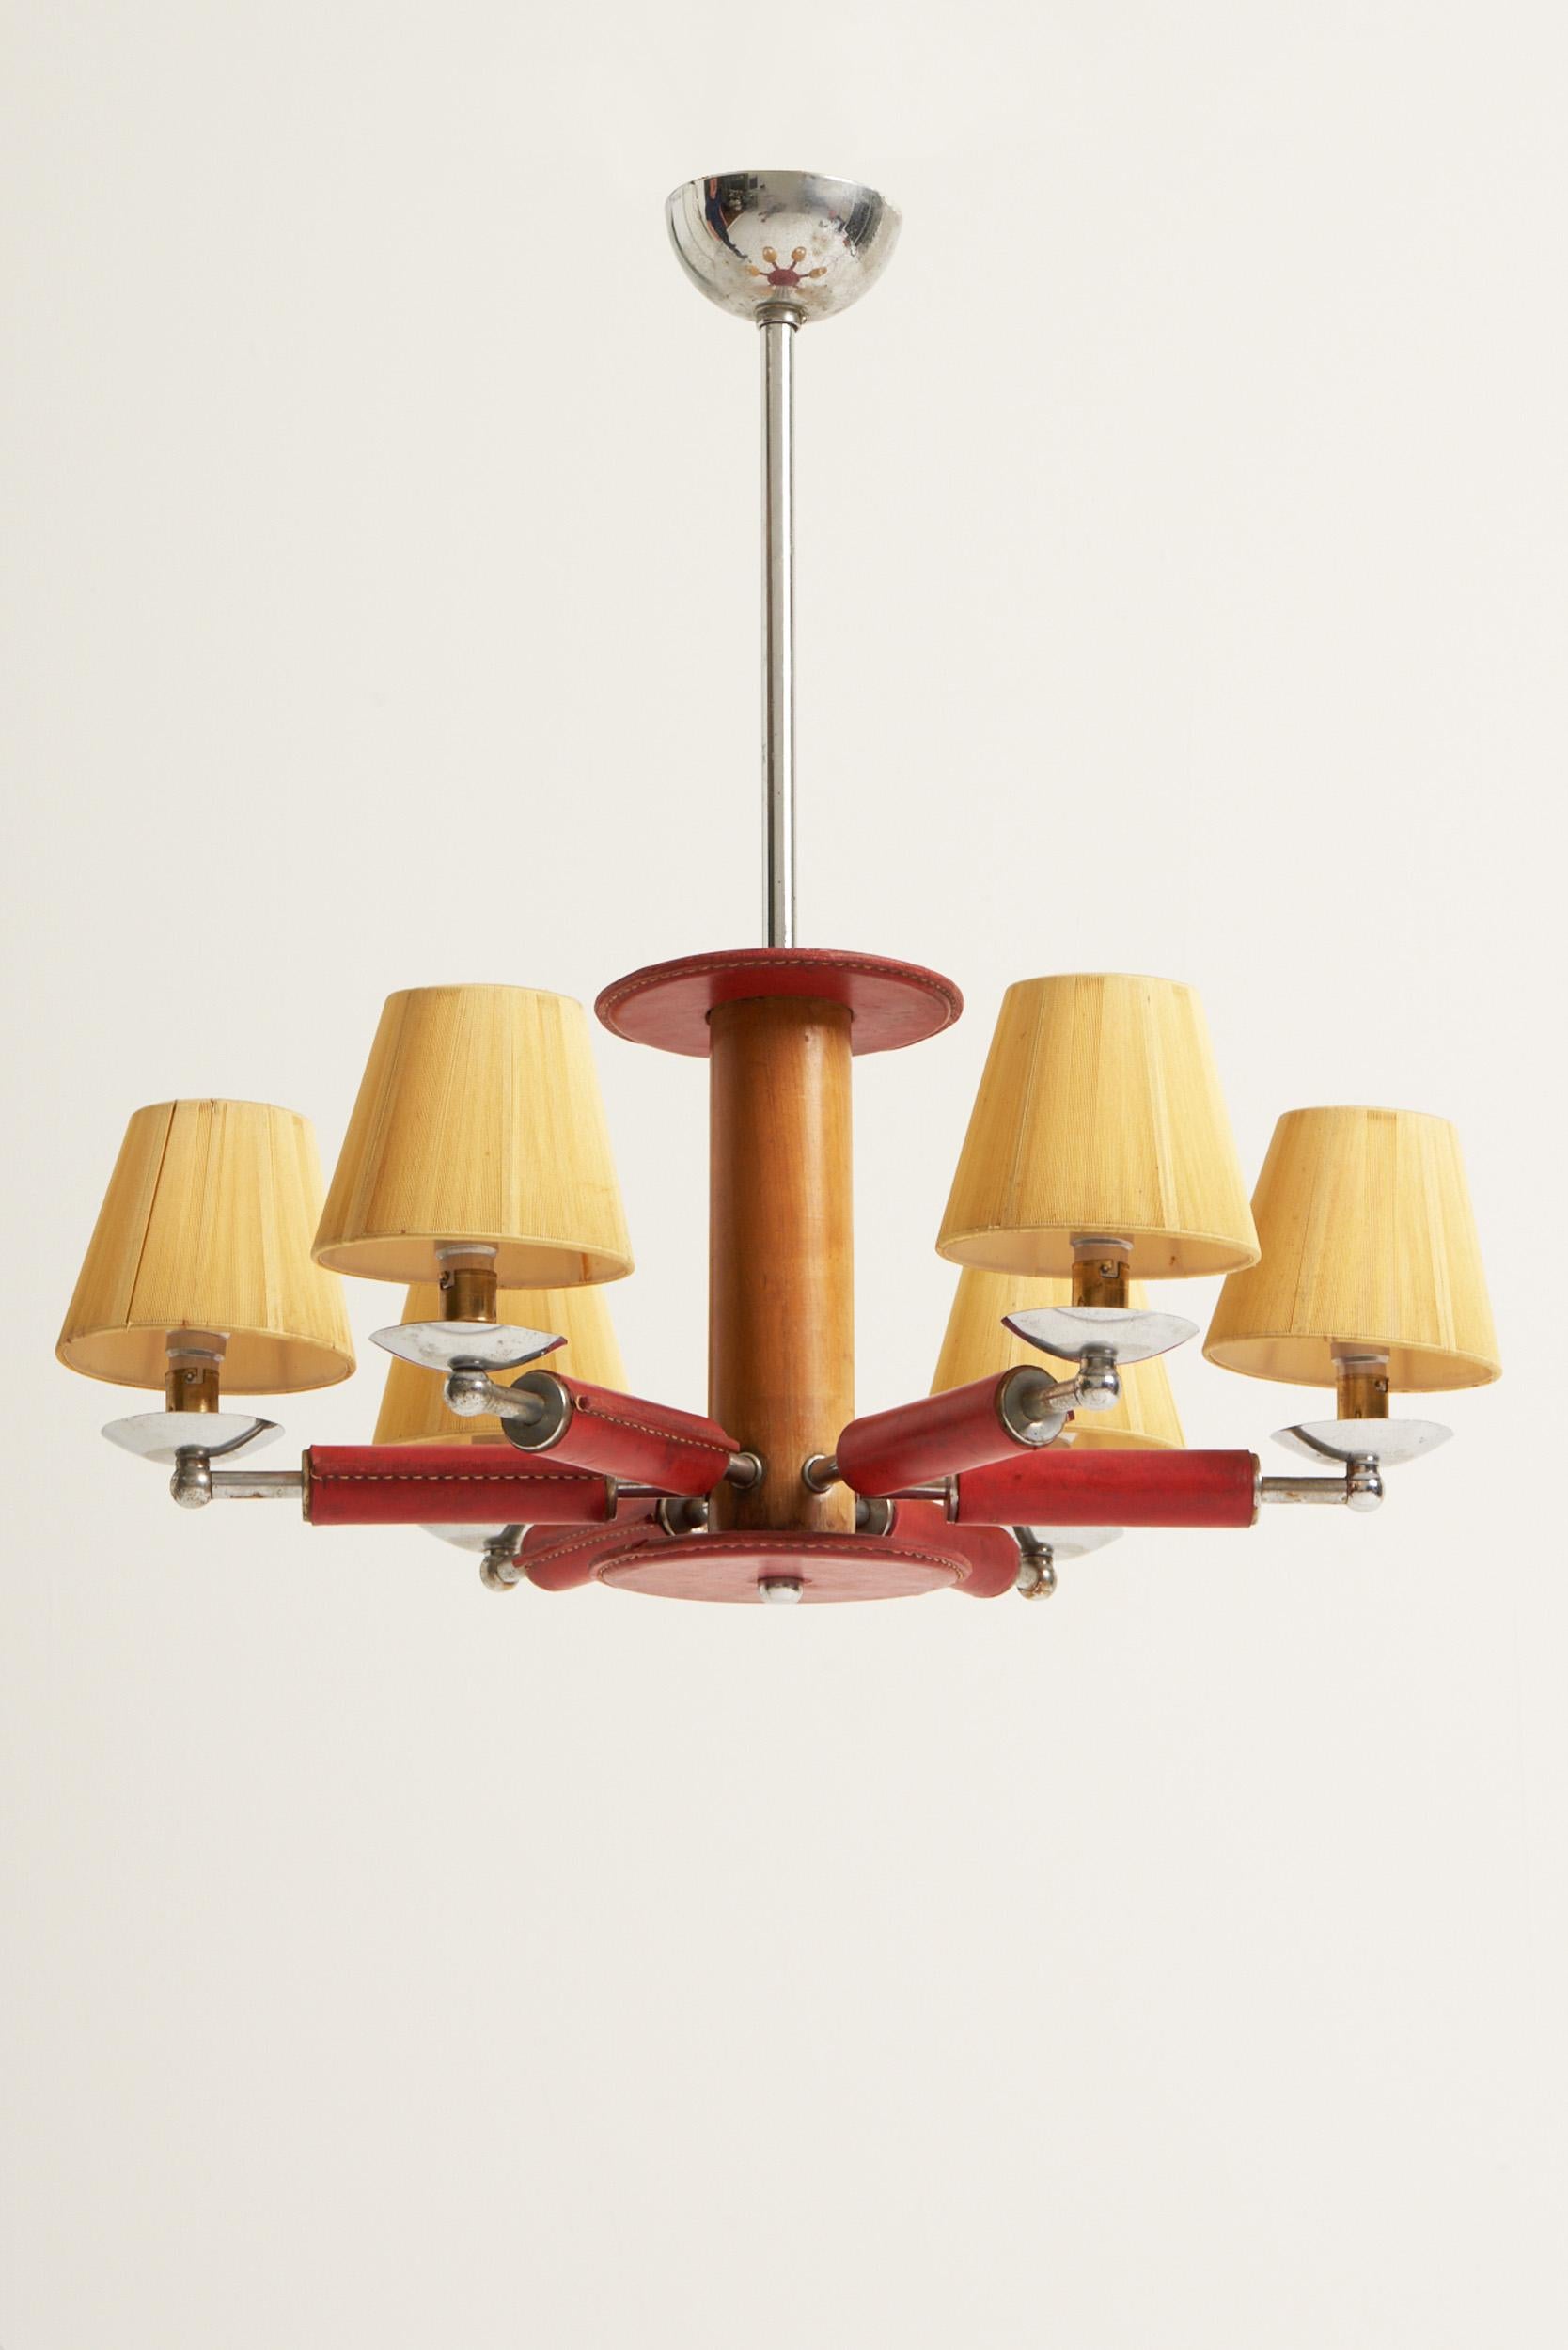 A saddle stitched red leather, oak and nickel six-armed ceiling light by Jacques Adnet (1900-1984). With its original shades. 
France, Circa 1955.